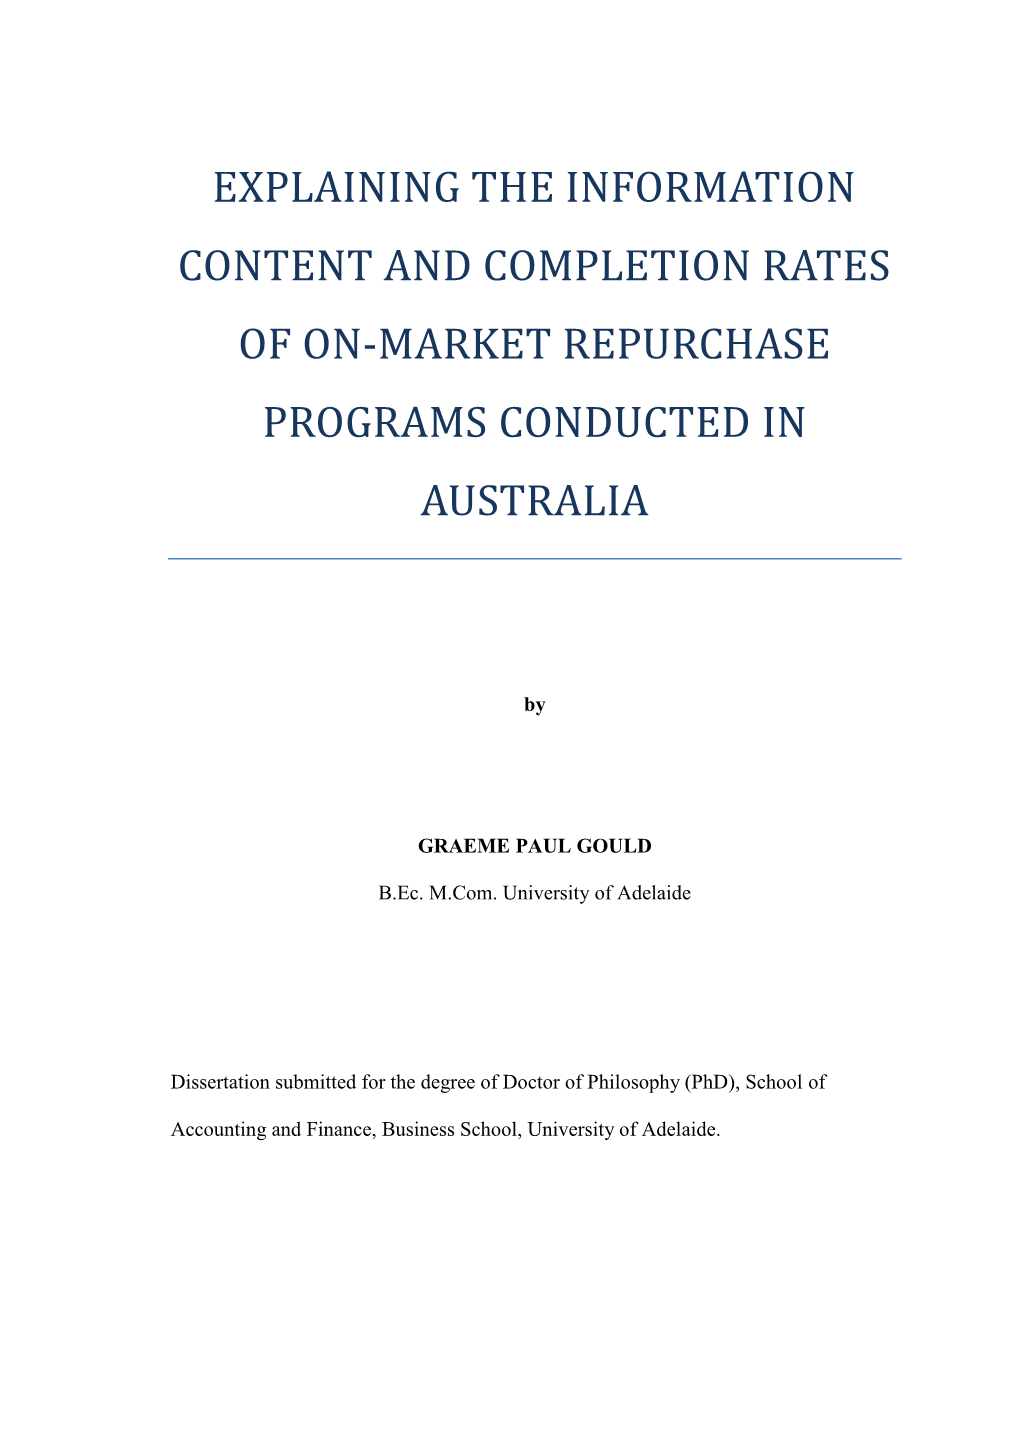 Explaining the Information Content and Completion Rates of On-Market Repurchase Programs Conducted in Australia